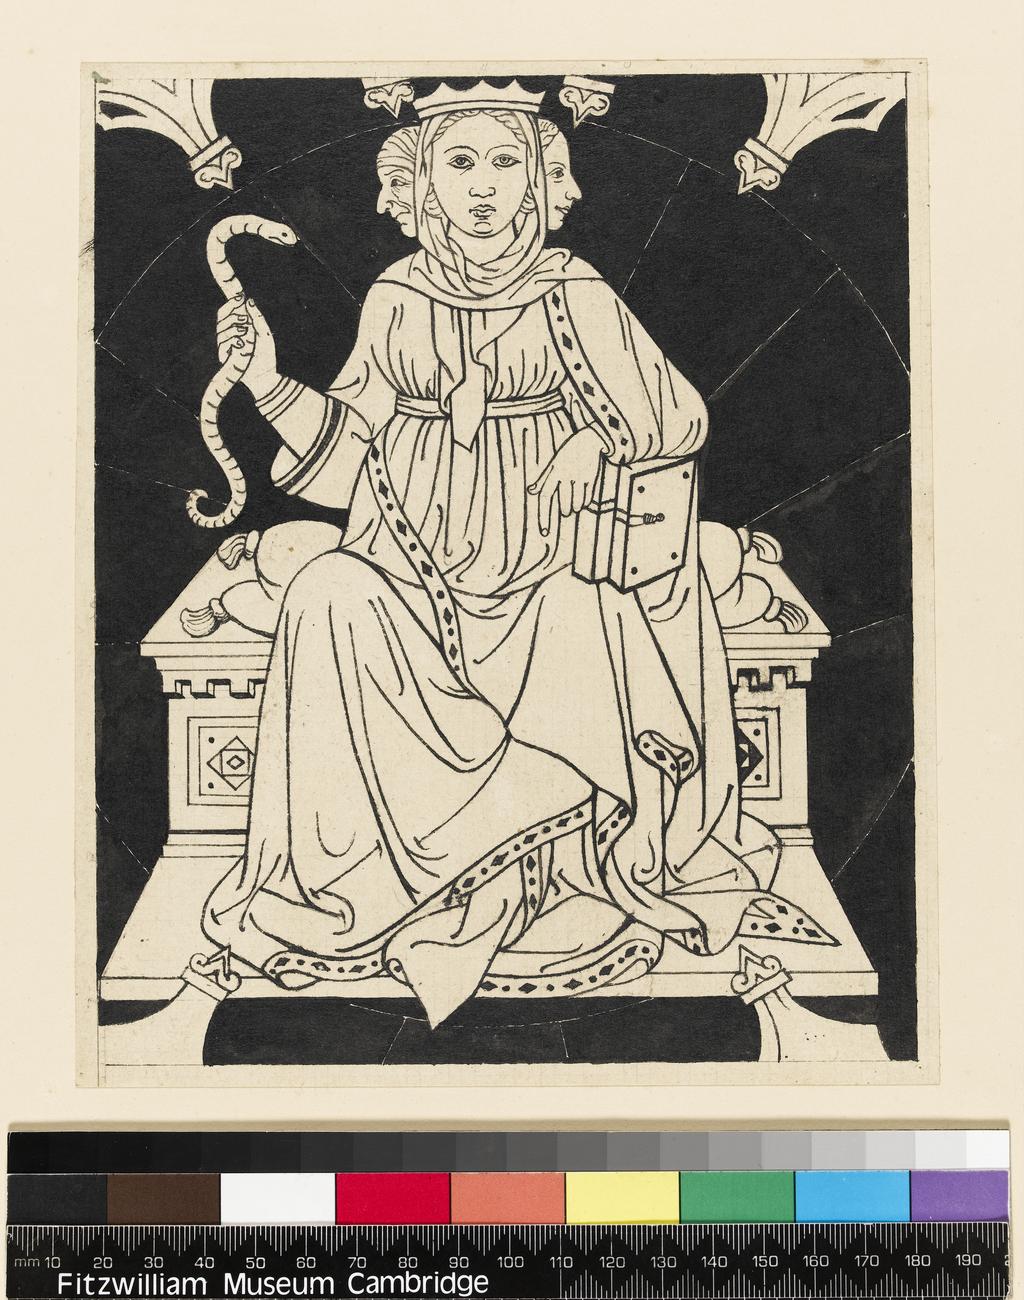 An image of Title/s: Drawing reduced from tracings taken from the inlaid marble pavement of Siena Cathedral during its restoration in the nineteenth centuryTitle/s: Prudence Maker/s: Maccari, Leopoldo (draughtsman) [ULAN info: Italian artist, 1850-1894?]Technique Description: pen and black ink, black wash on lightly squared paper Dimensions: height: 204 mm, width: 172 mm